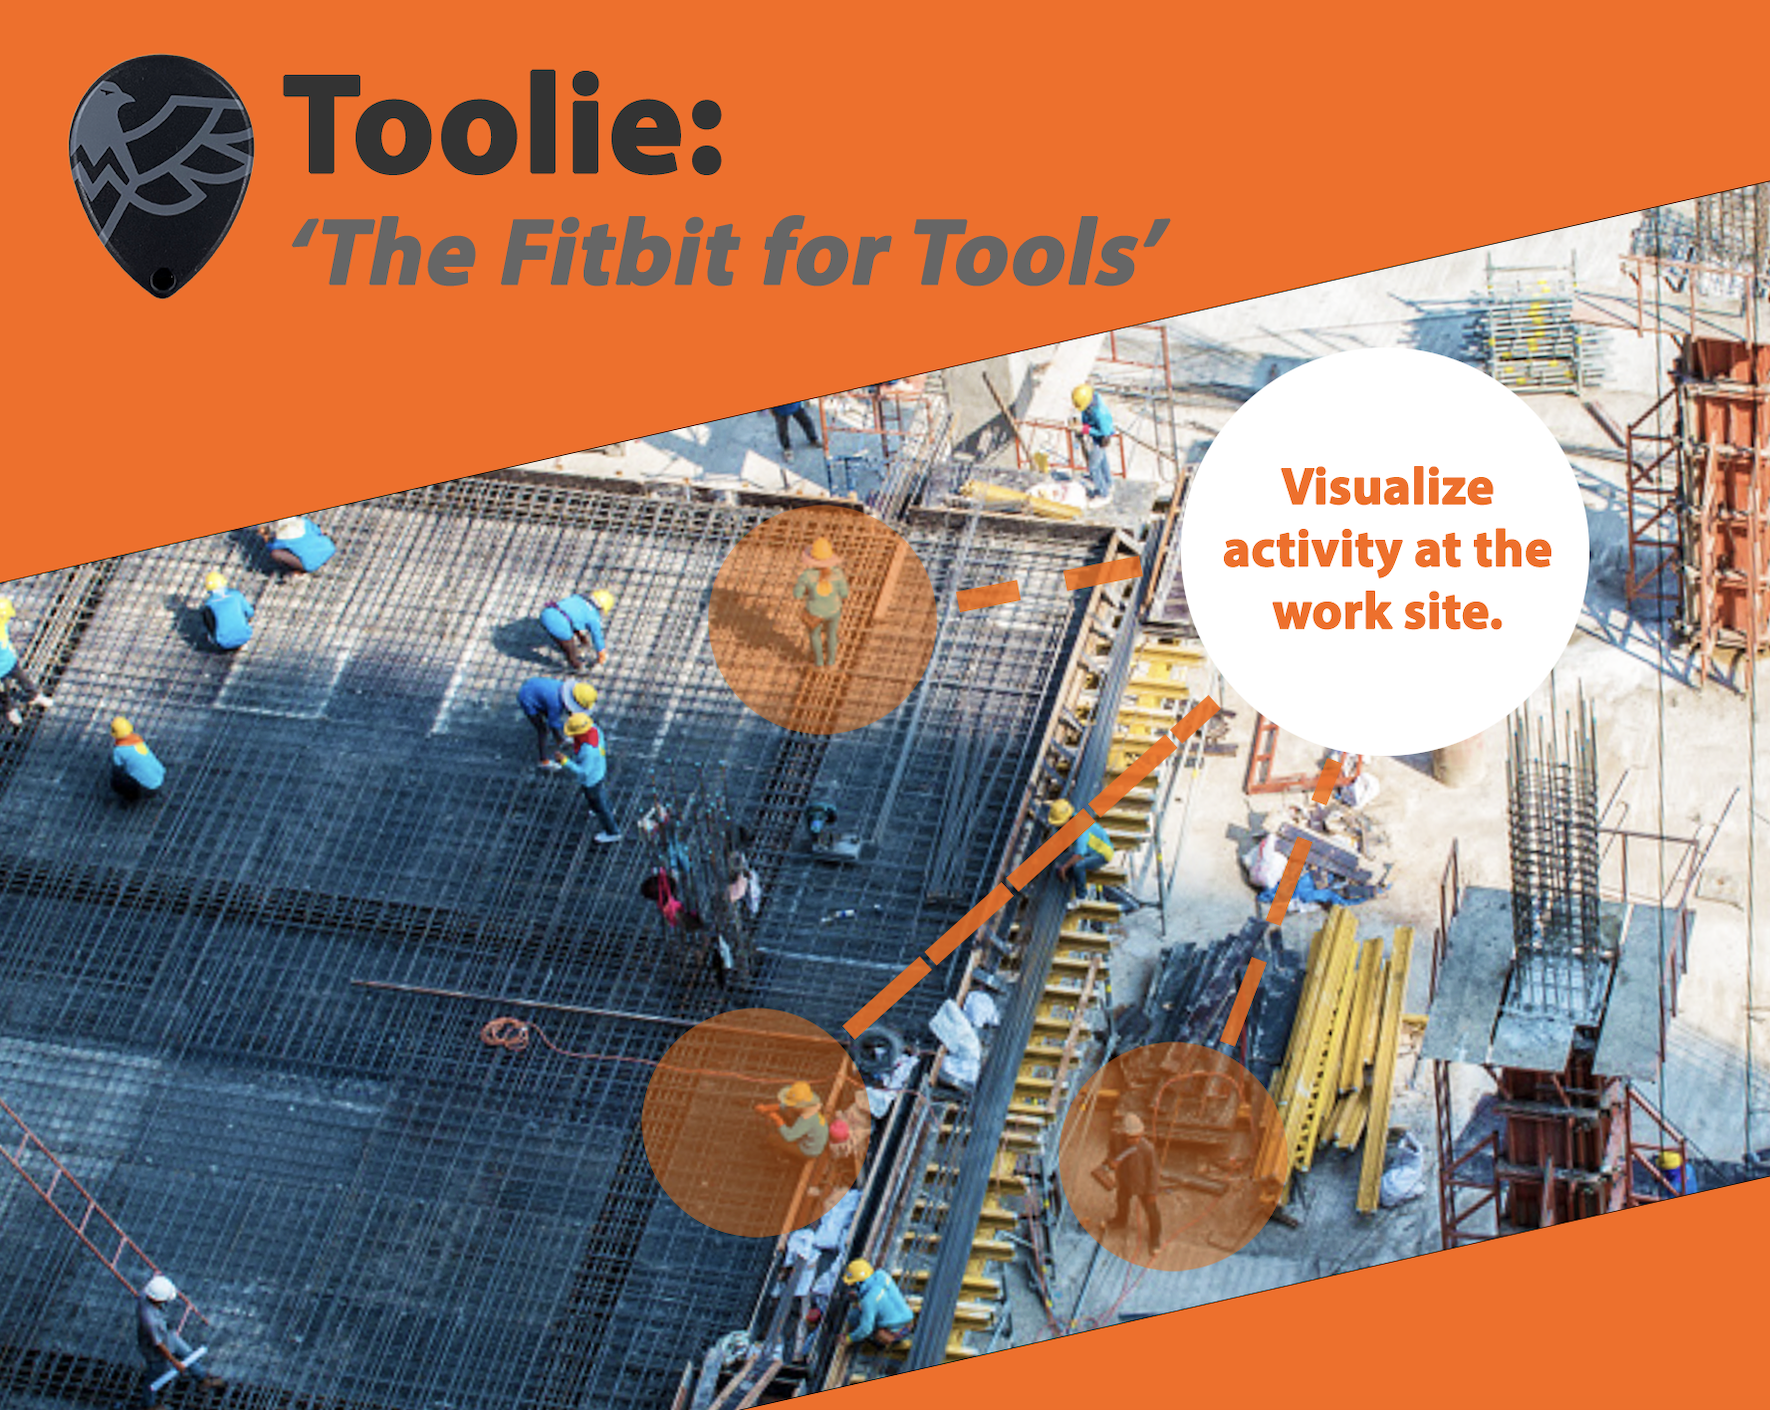 Toolie, The Fit Bit for Tools